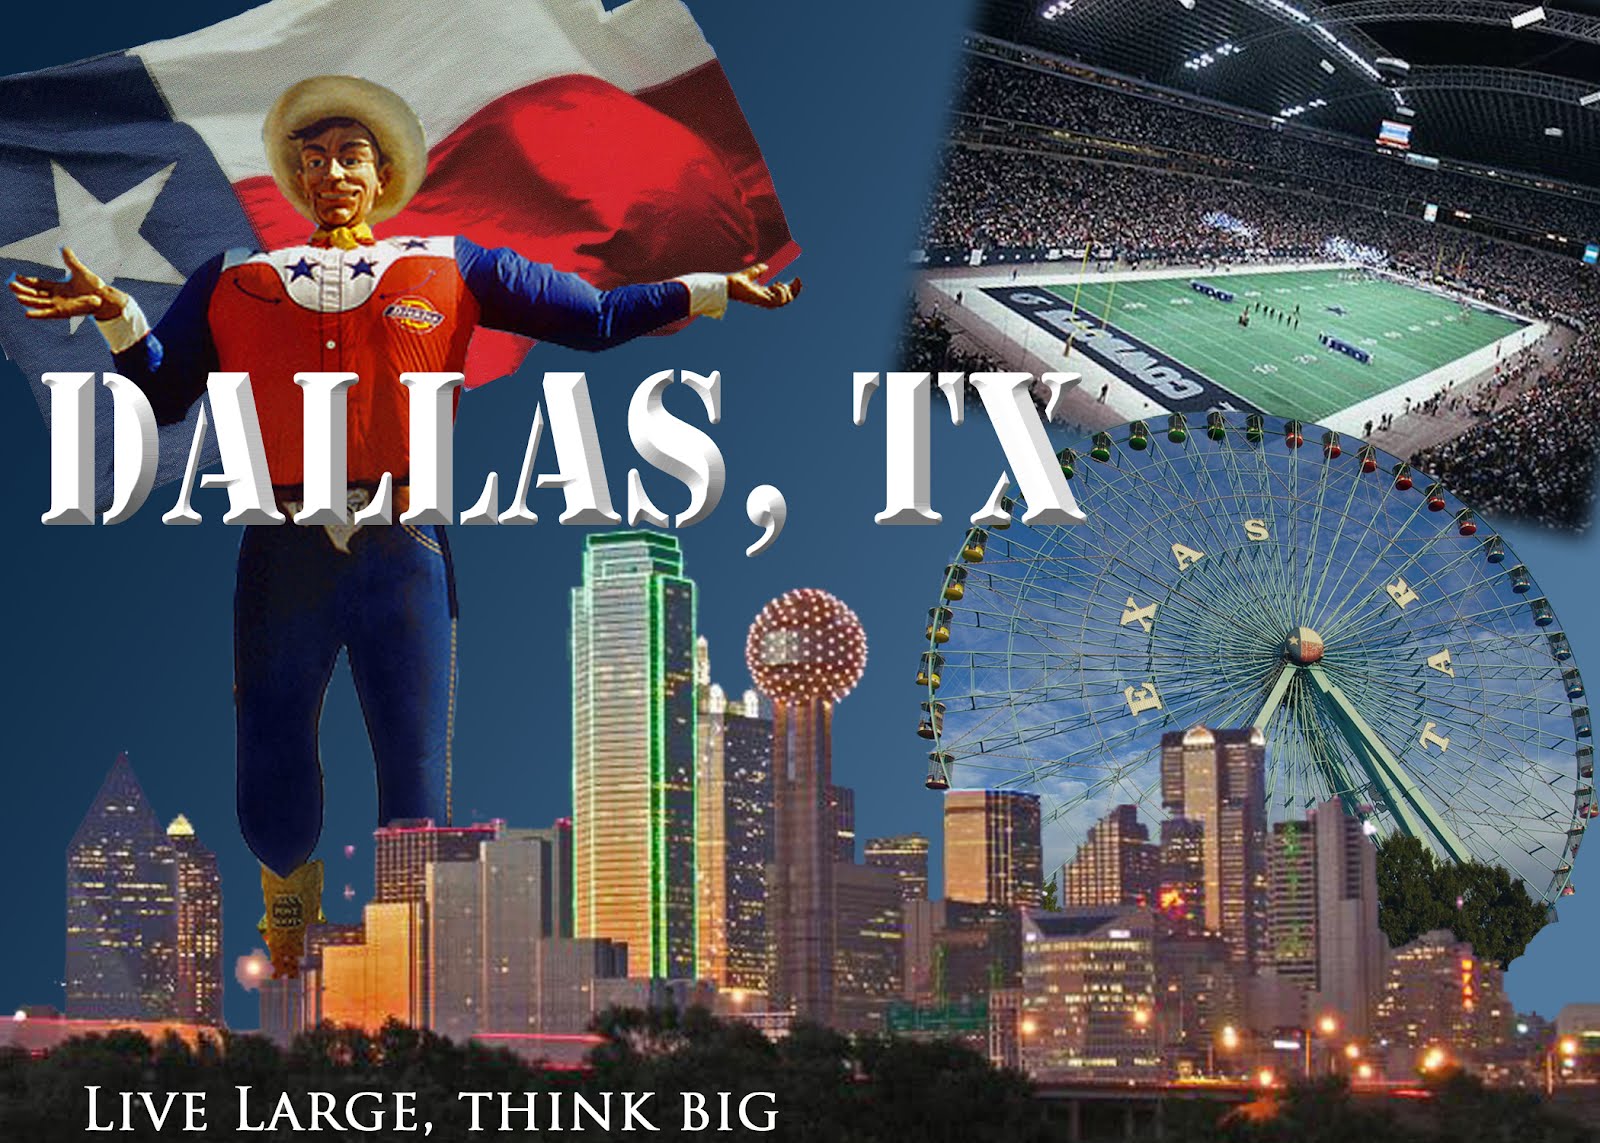 North Dallas -- The Real Texas Starts Here 